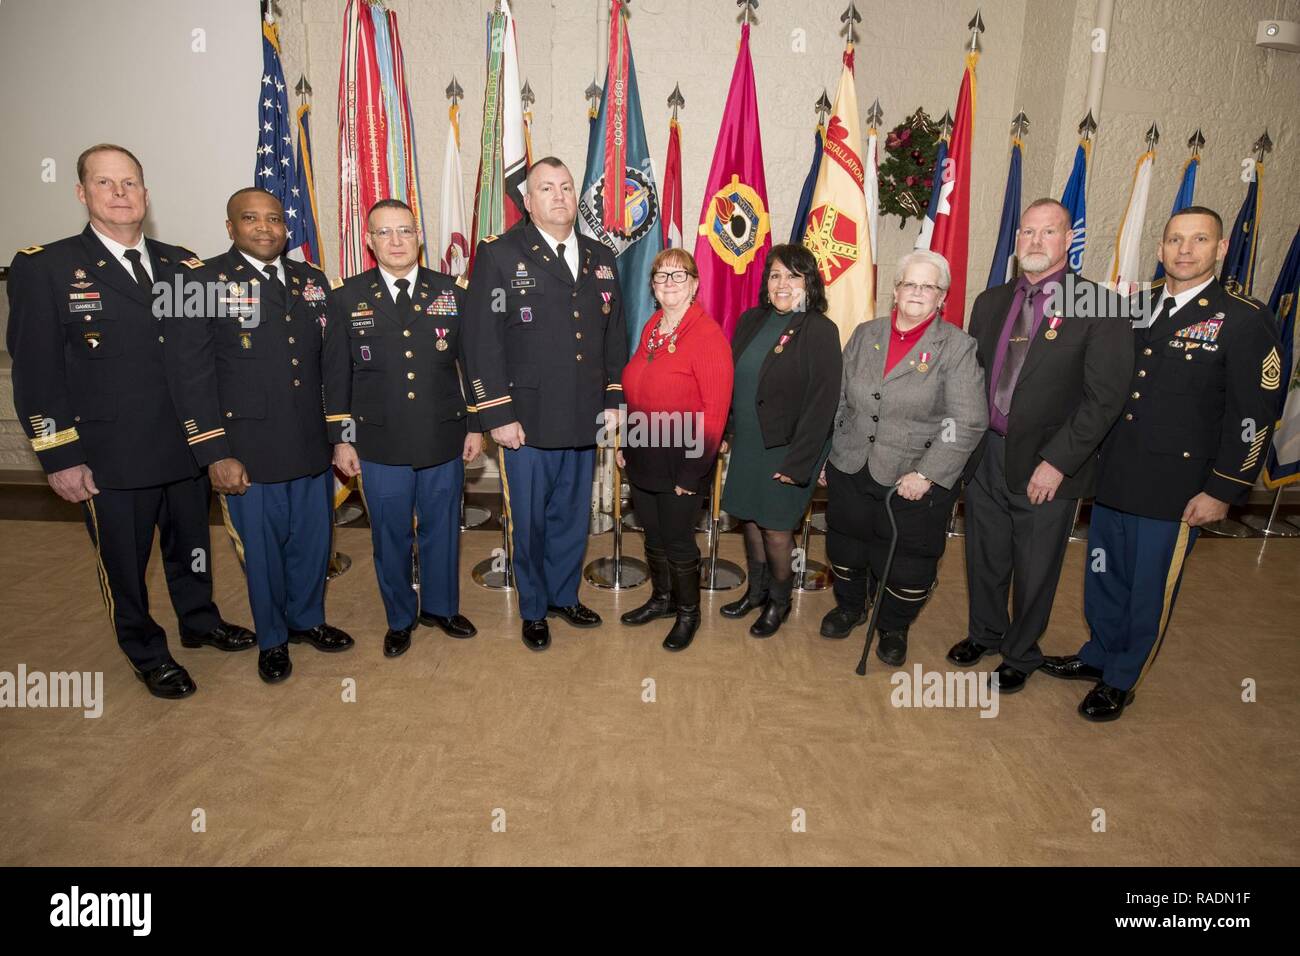 The seven retirees participating in an island-wide retirement ceremony stand with Maj. Gen. Duane Gamble (left), commanding general, U.S. Army Sustainment Command, and Command Sgt. Maj. Joe Ulloth (right), command sergeant major, ASC, following award recognitions Dec. 13 in Heritage Hall, Rock Island Arsenal. Stock Photo